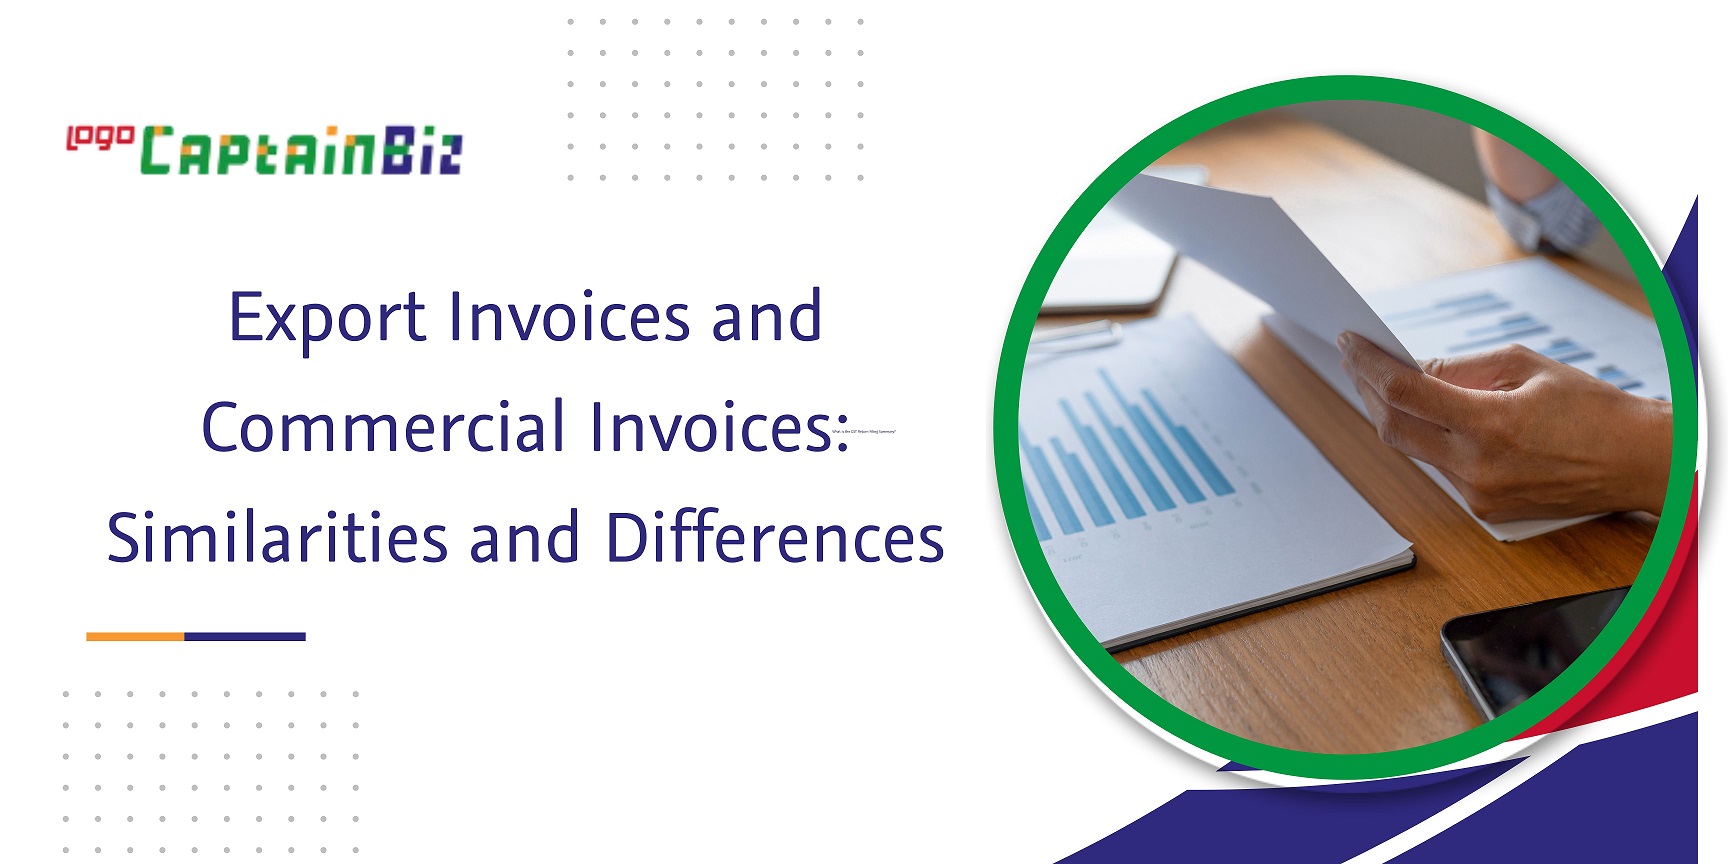 CaptainBiz: export invoices and commercial invoices similarities and differences